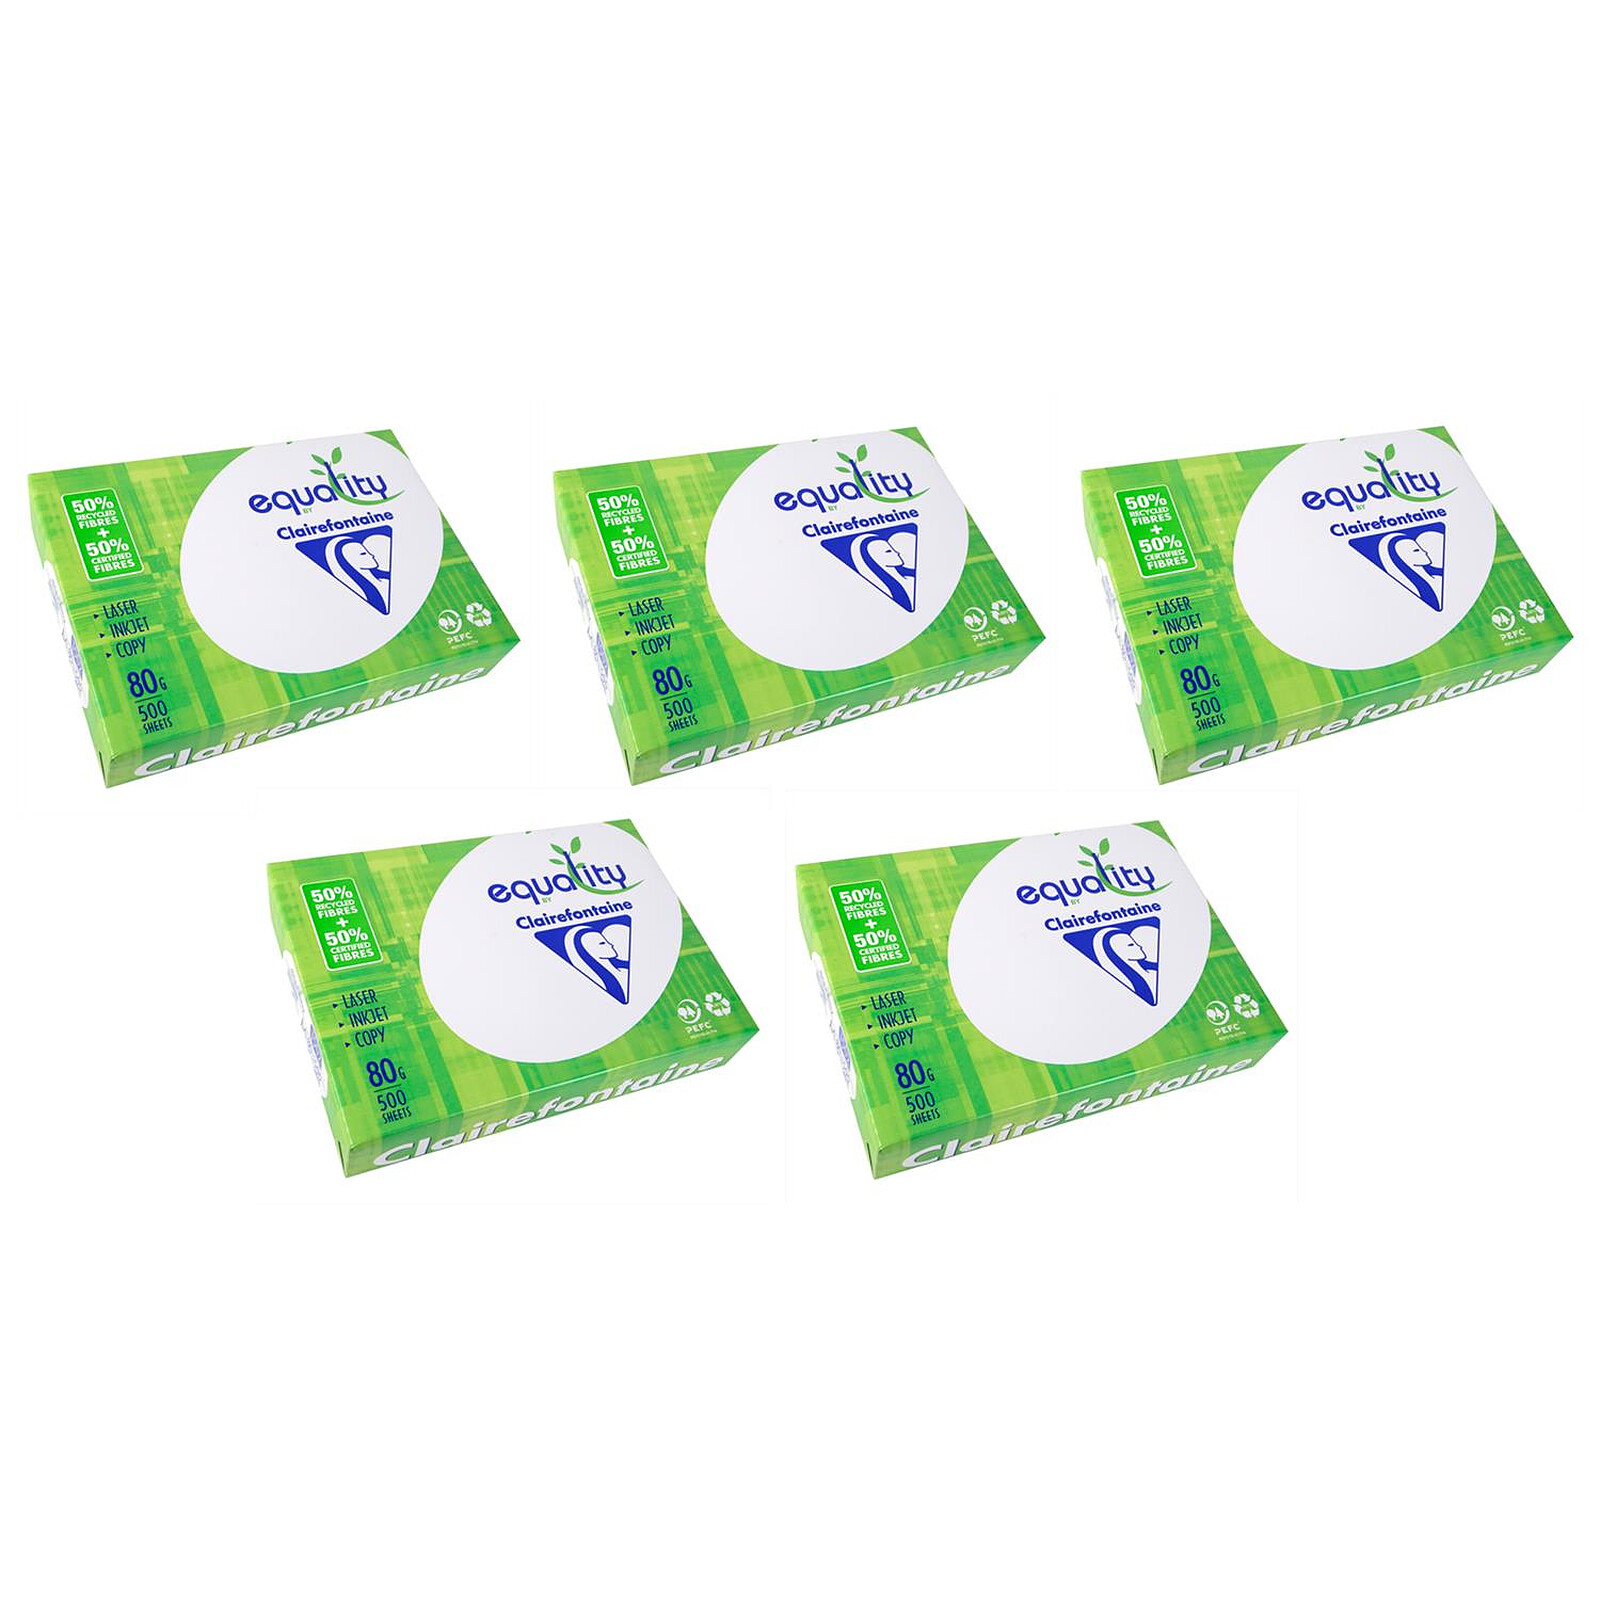 Clairefontaine Clairalfa 80g A4 ramette 500 feuilles Blanc X5